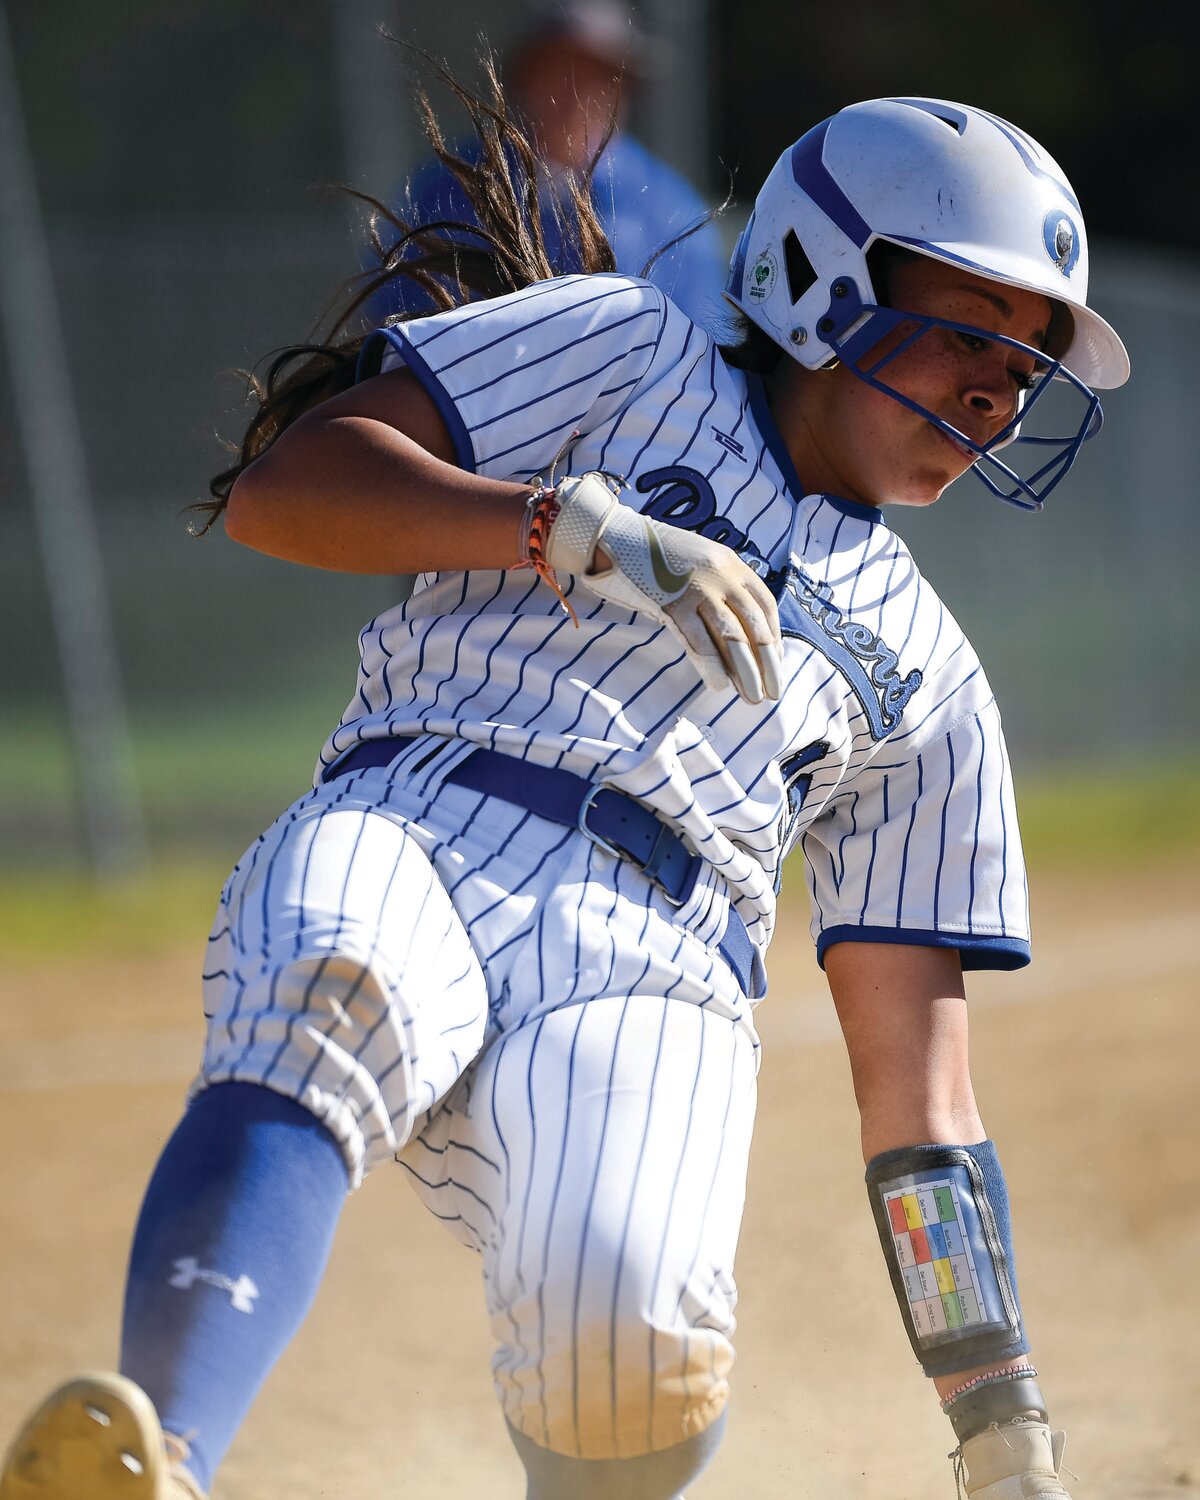 Quakertown’s Cadence Lewis scores the 11th run of the game for the Panthers in the bottom of the sixth inning.